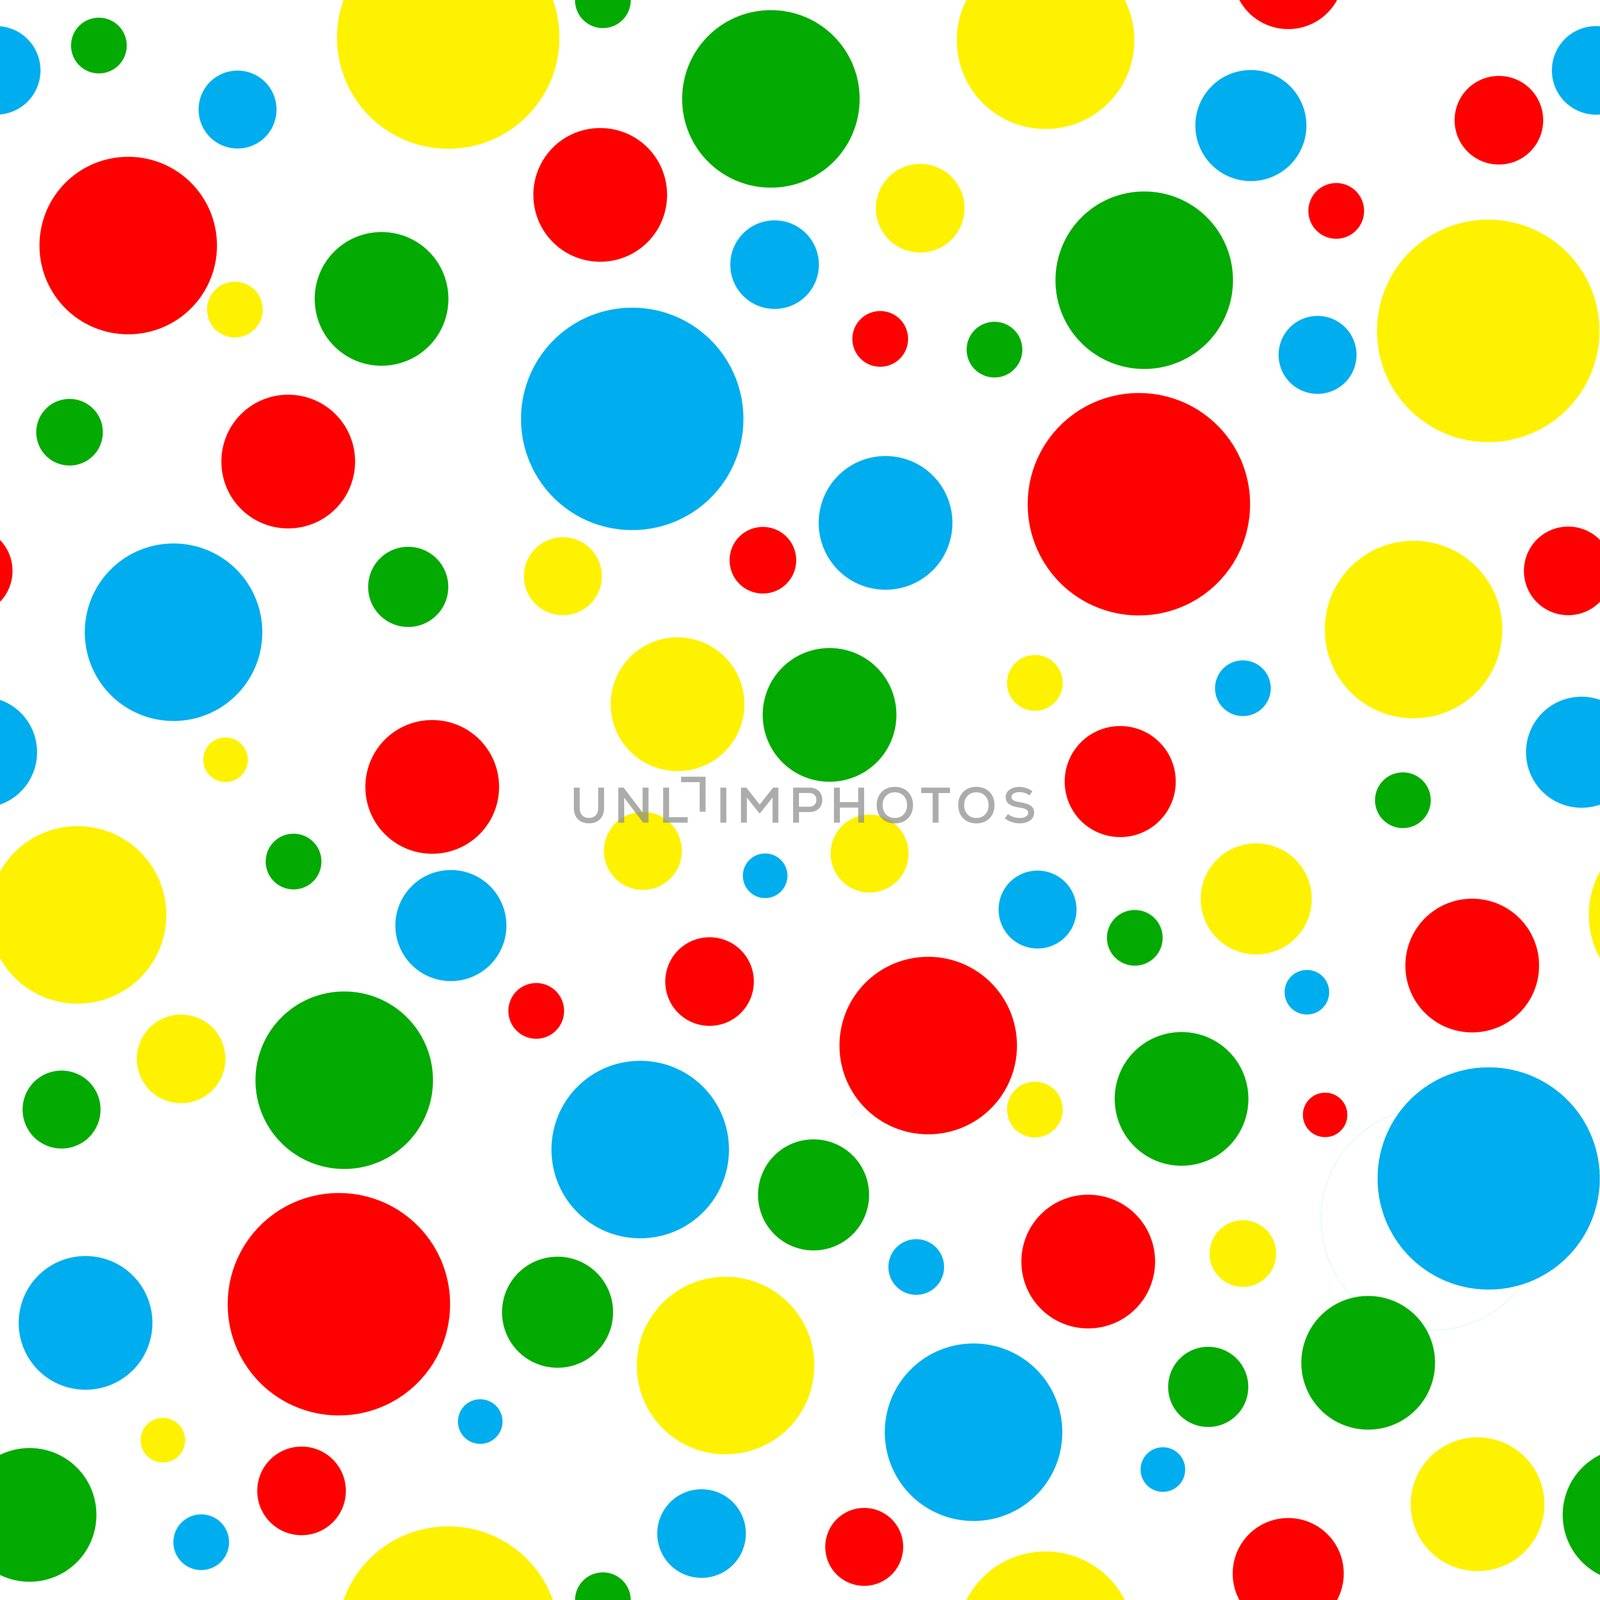 Seamless pattern of bright crayon color polka dots in various sizes on white background